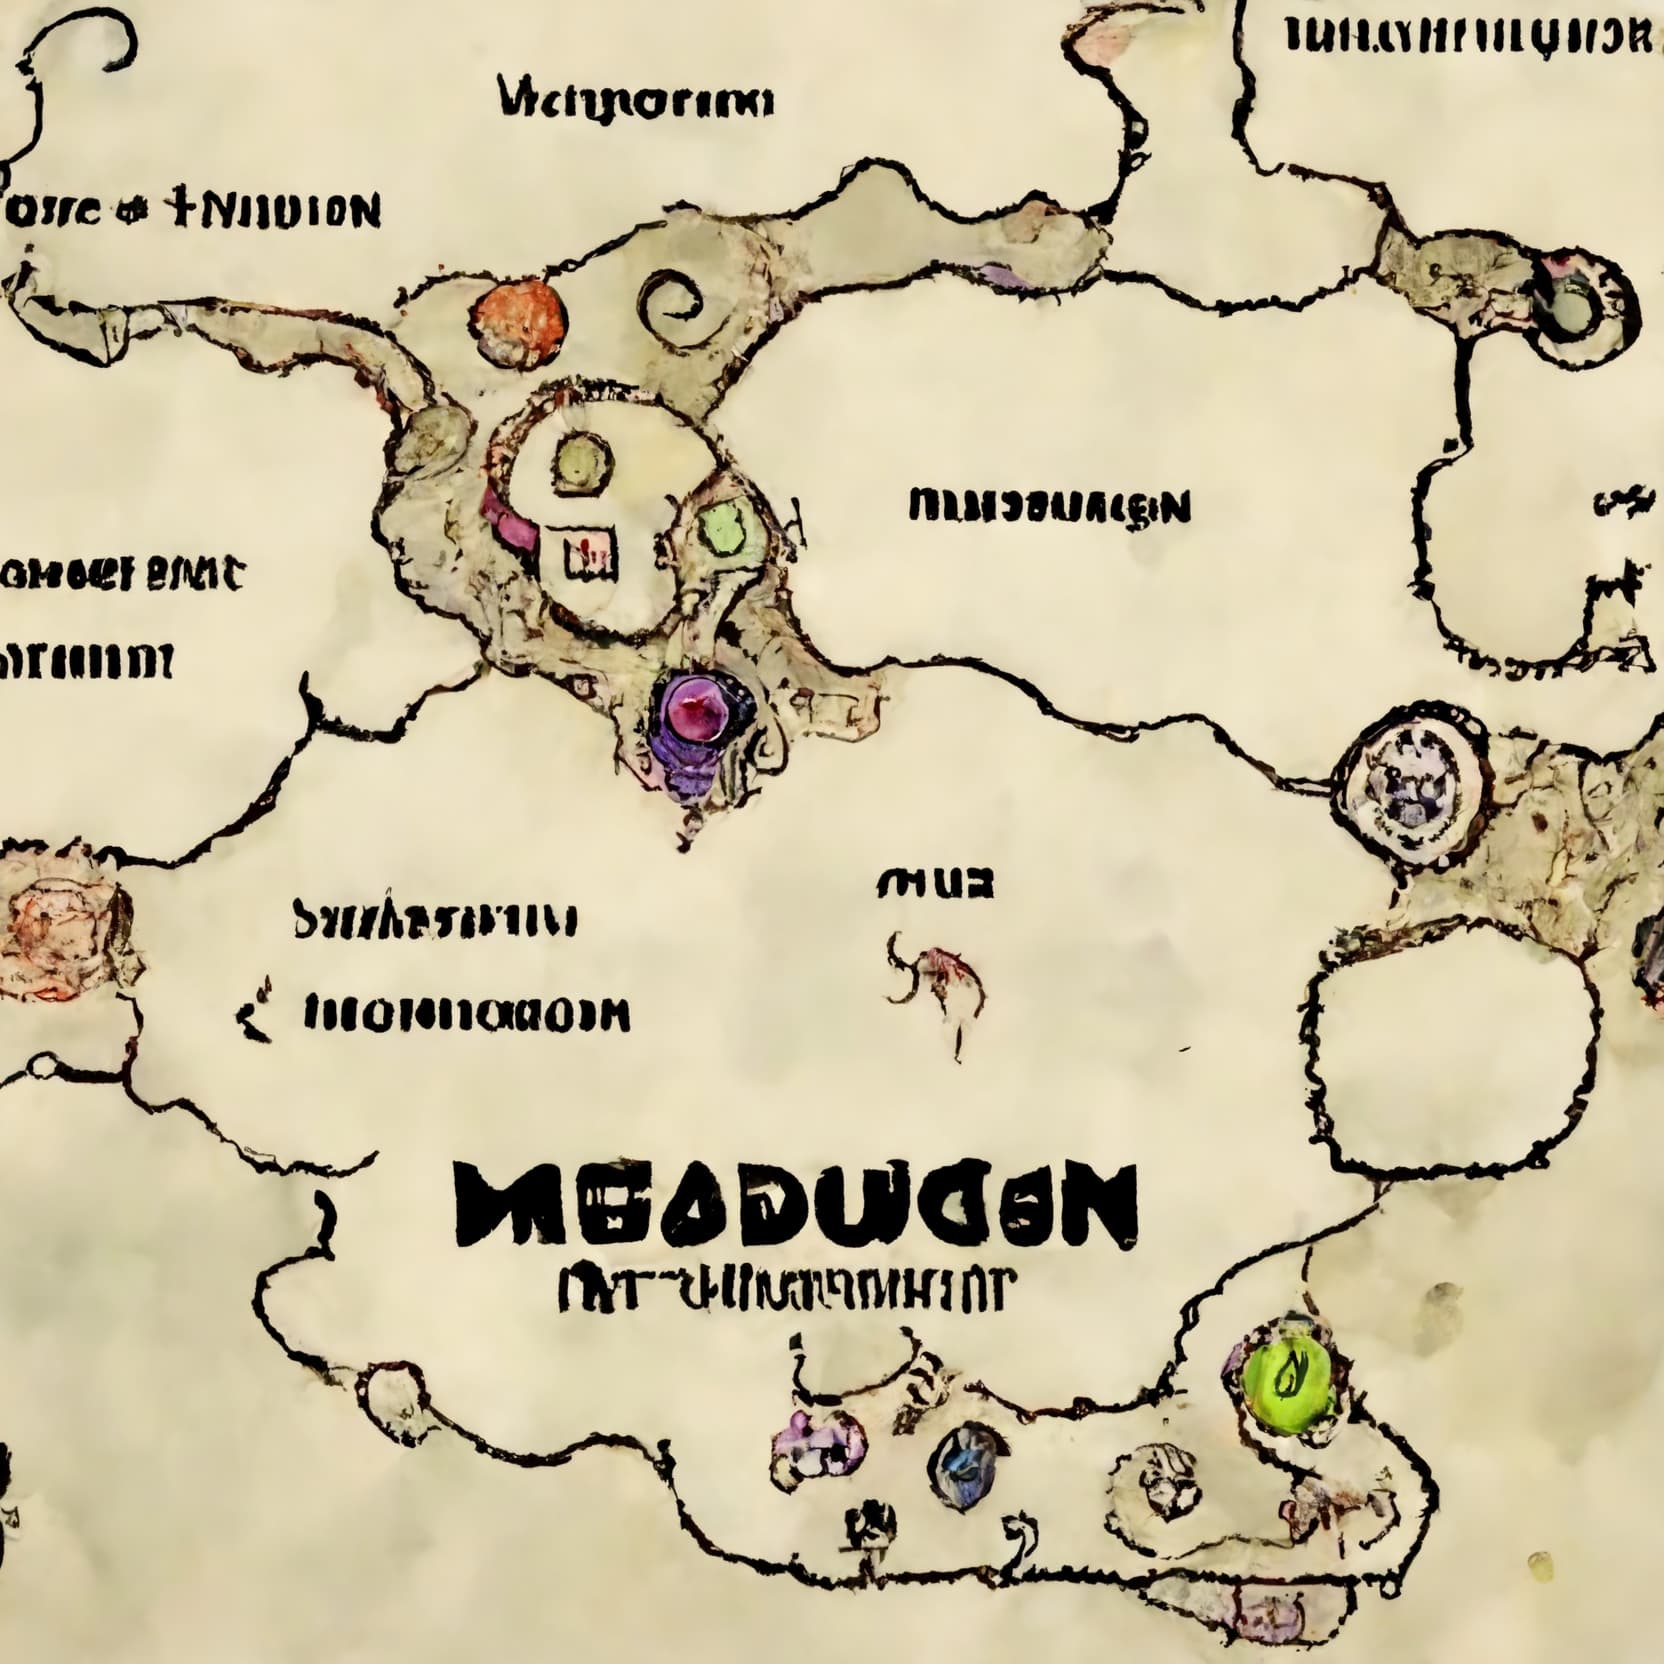 11bf8de4-9eeb-4e2d-af78-4a46cd13e68a_Gardens_usable_coloured_megadungeon_map_annotated_with_traps_and_monster_symbols_and_surrounding_environment